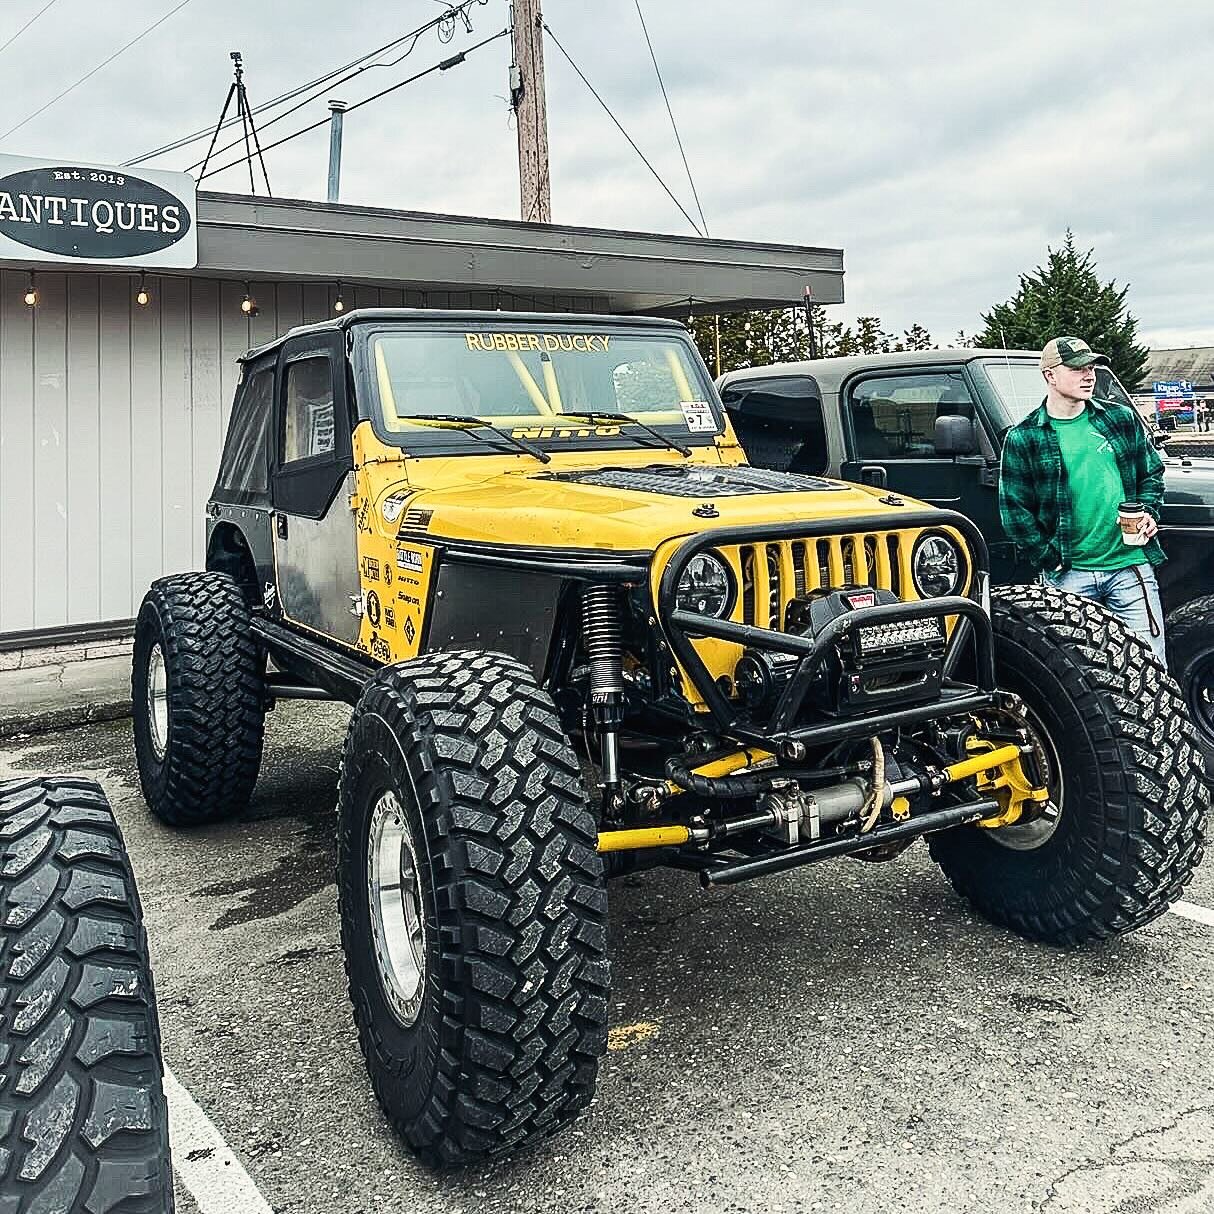 Join Trail Coins this Sunday 3.4.2024 for Java and Jeeps 

In Port Orchard Wa at Josephine's Mercantile 701 Bay Street
9am to 11am 
COFFEE &amp; DONUTS &amp; RAFFLE

Last month there was 50+ Jeeps! Fun for the whole family. Come meet new friends and 